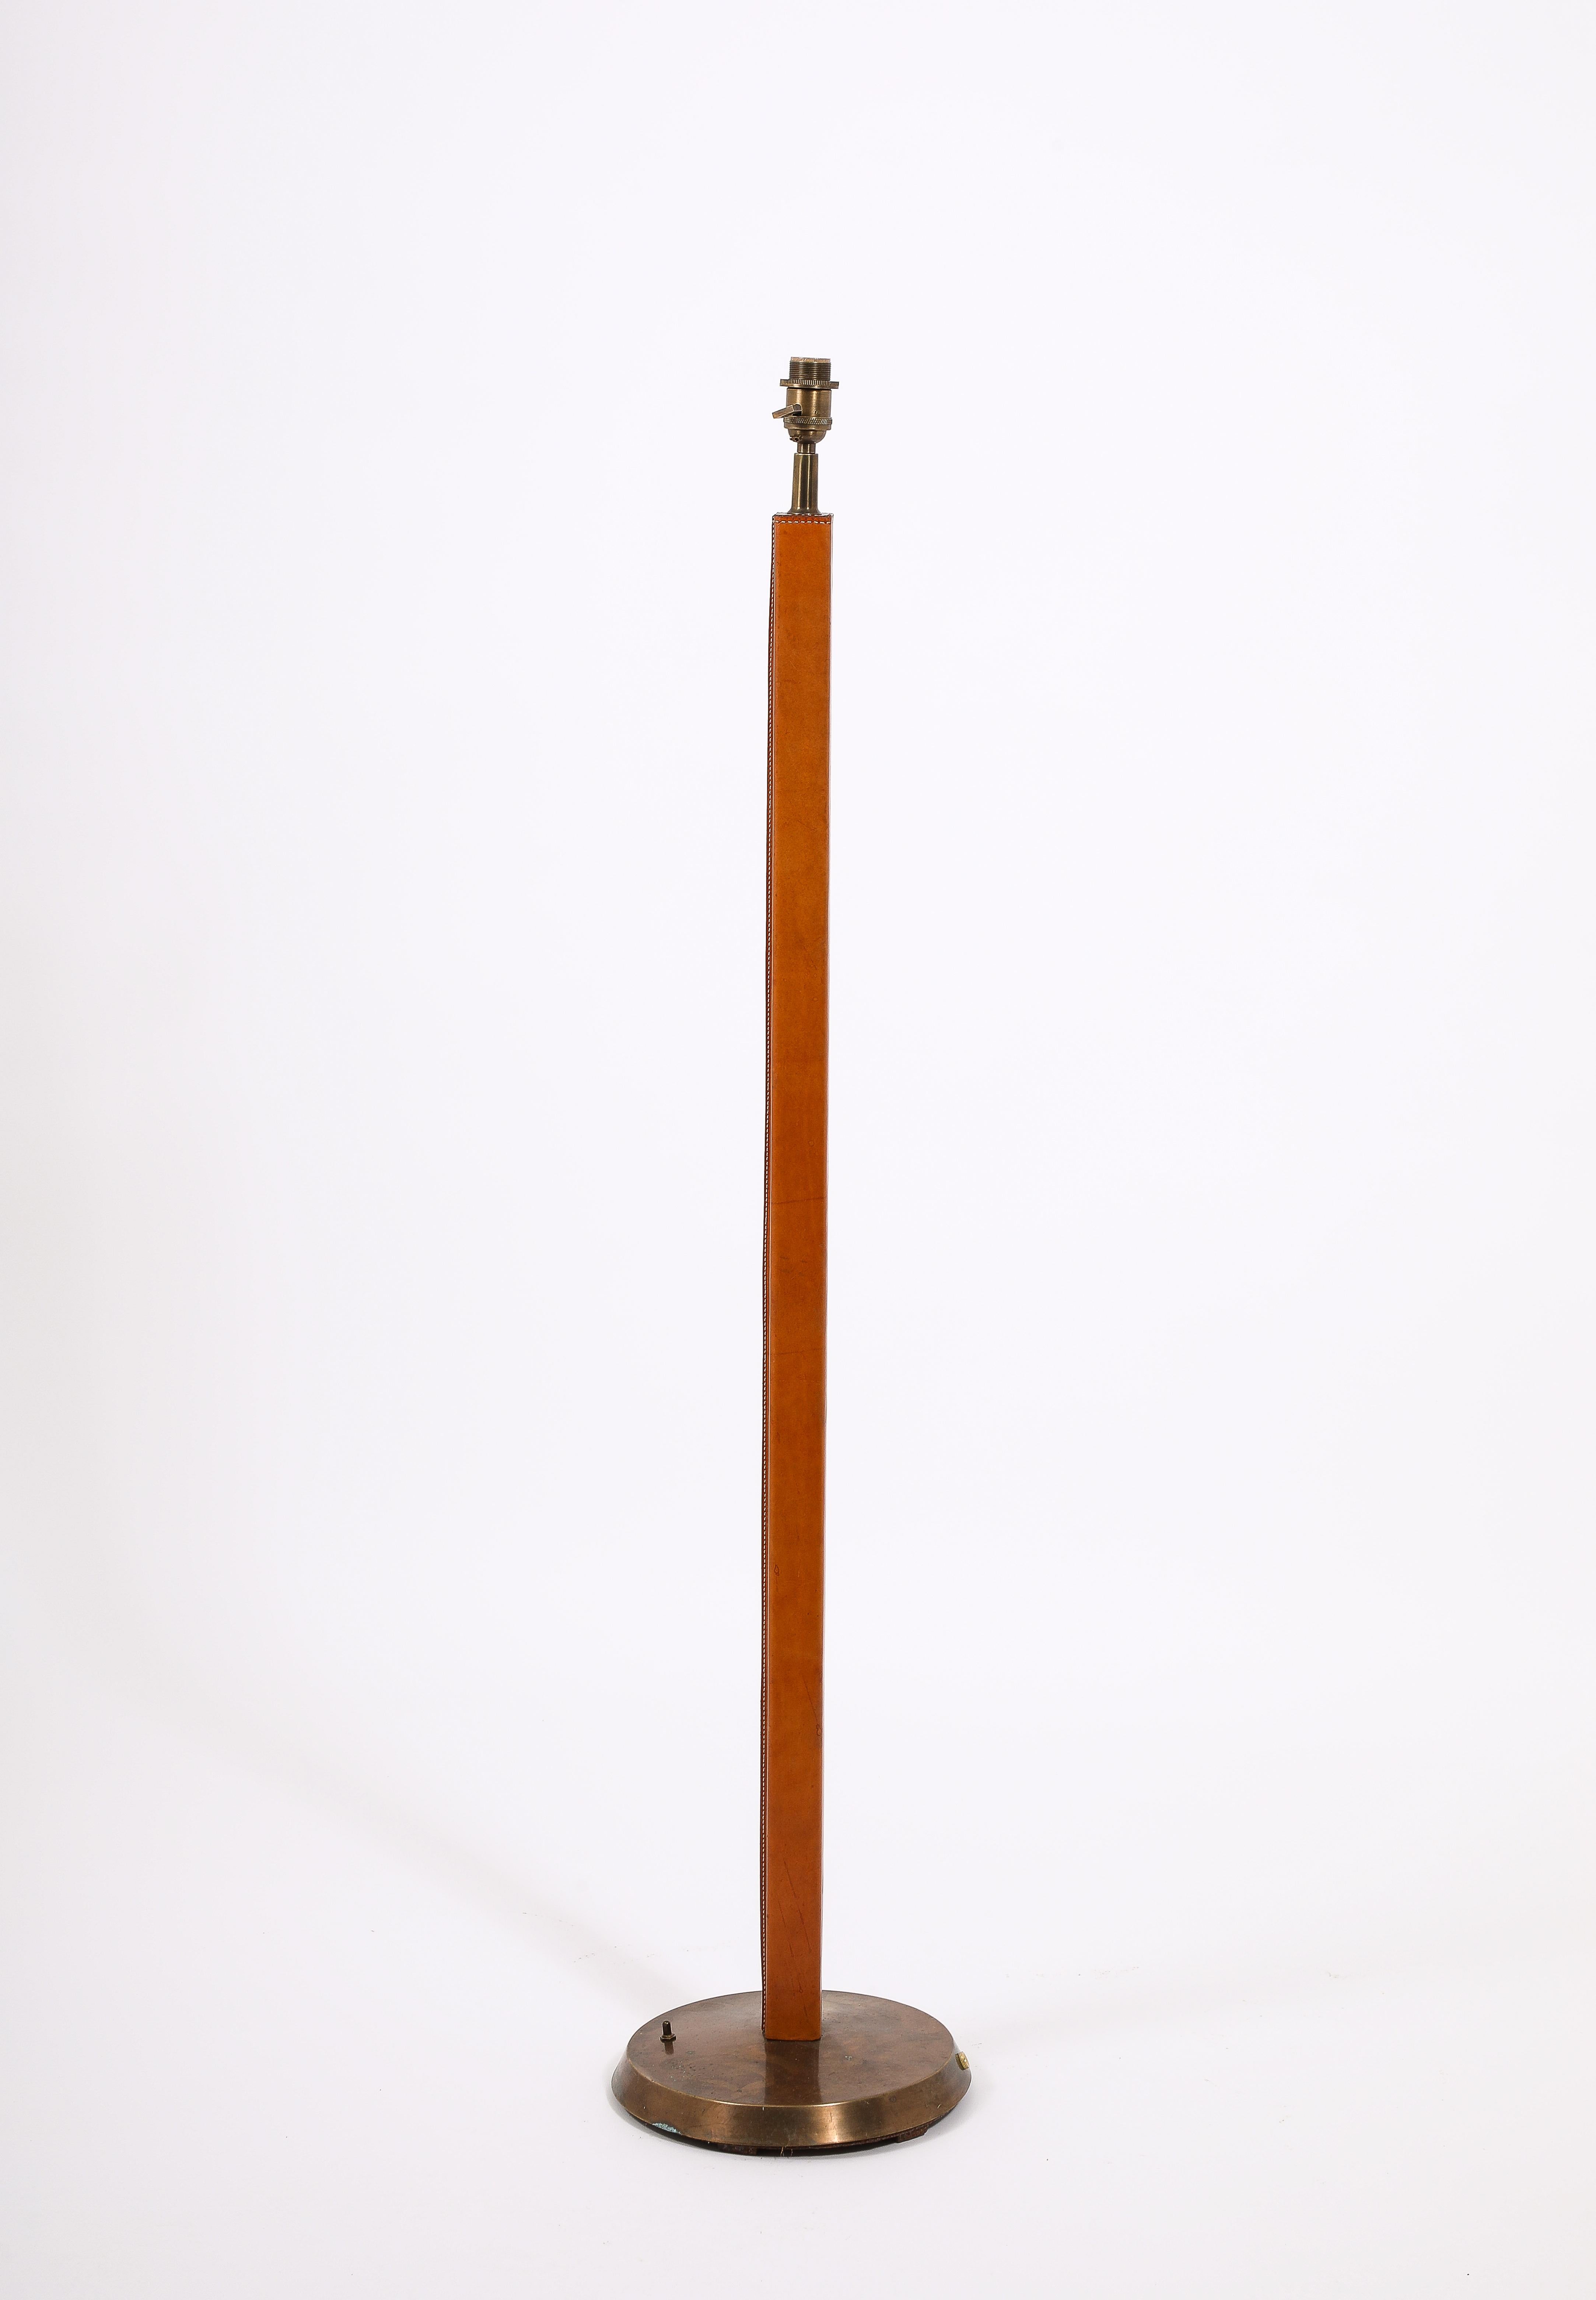 20th Century Brass & Saddle Leather Floor Lamp, France 1950's For Sale